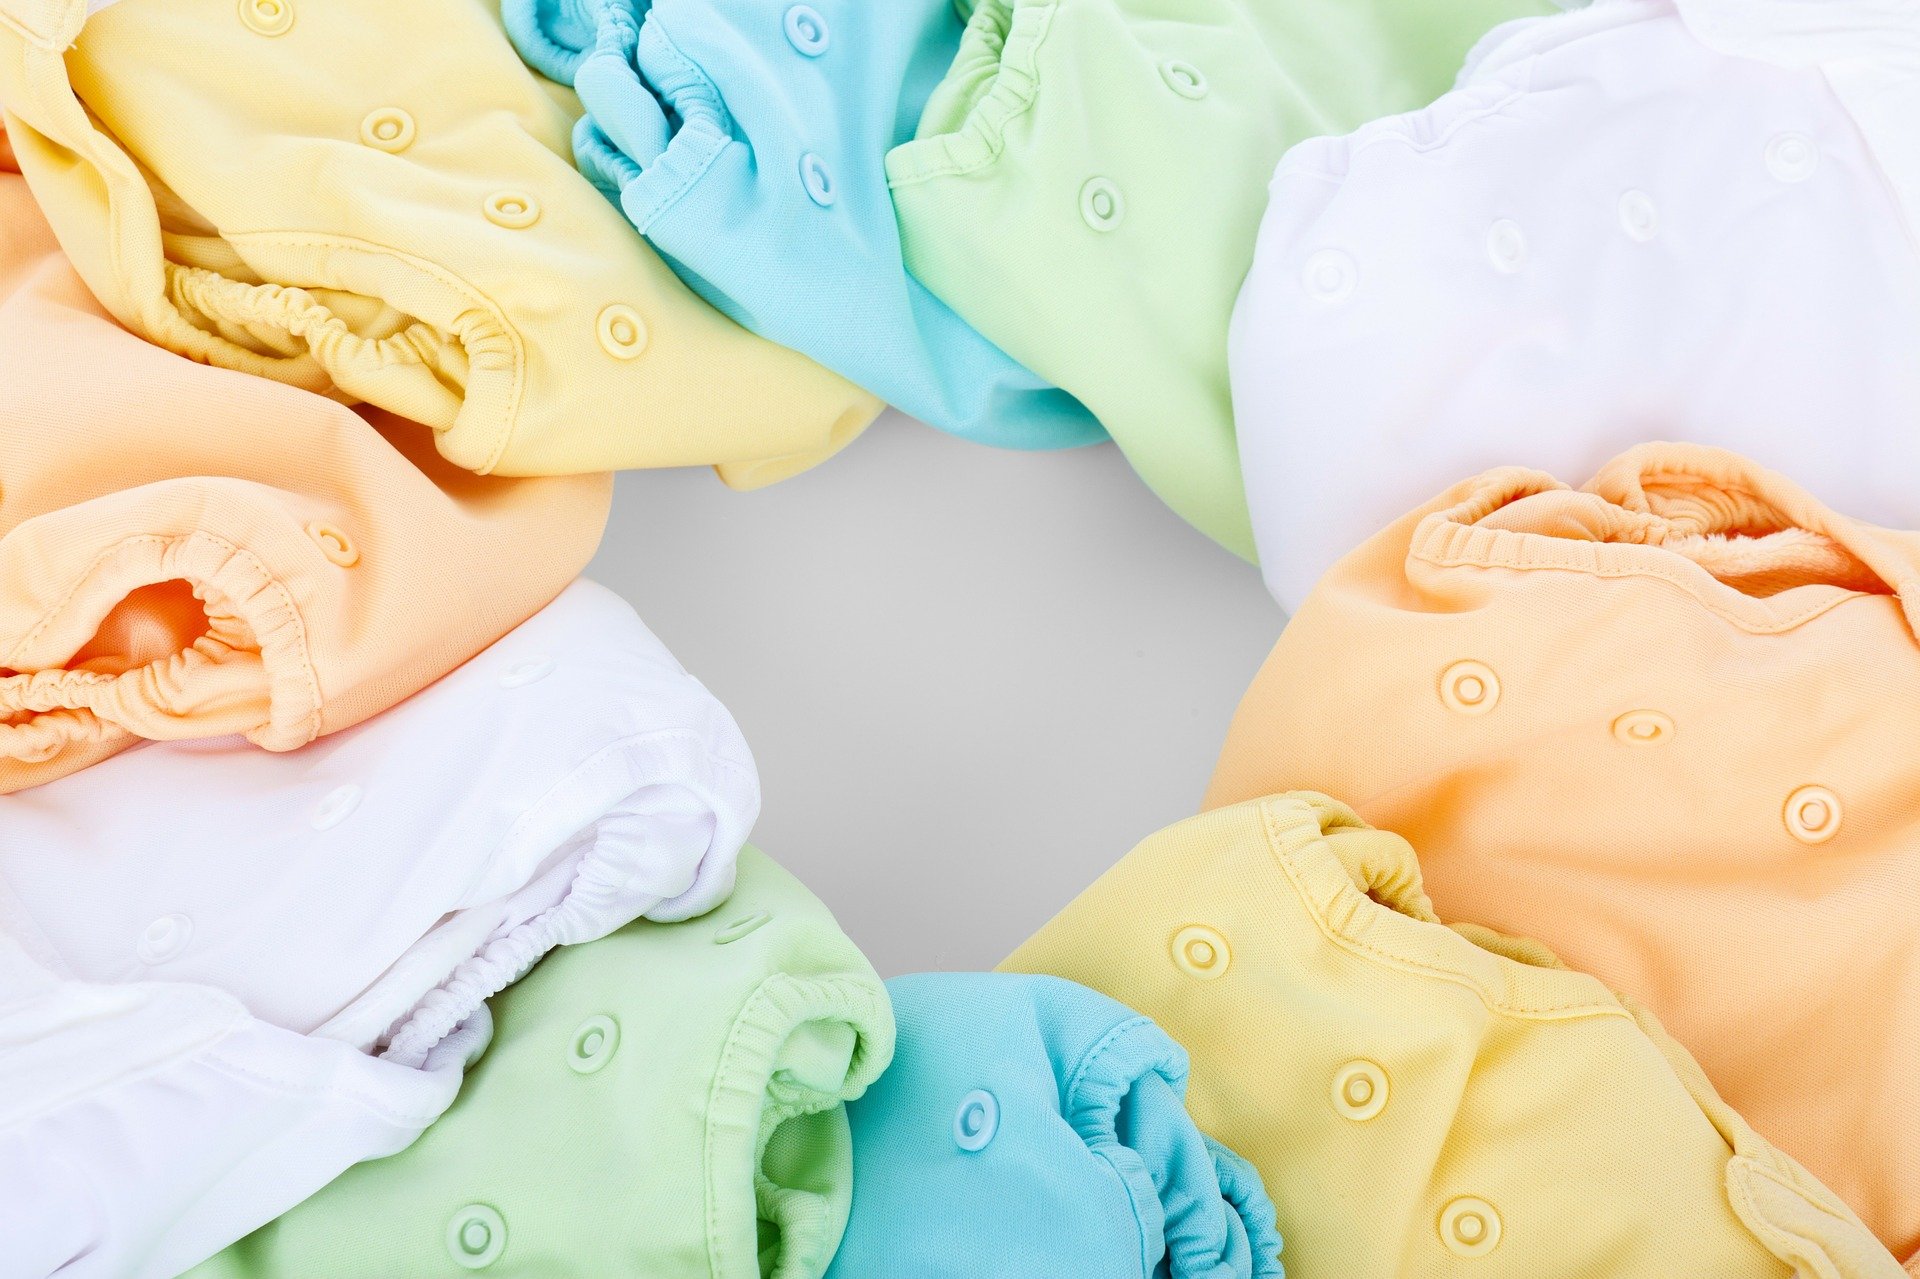 Washing baby clothes